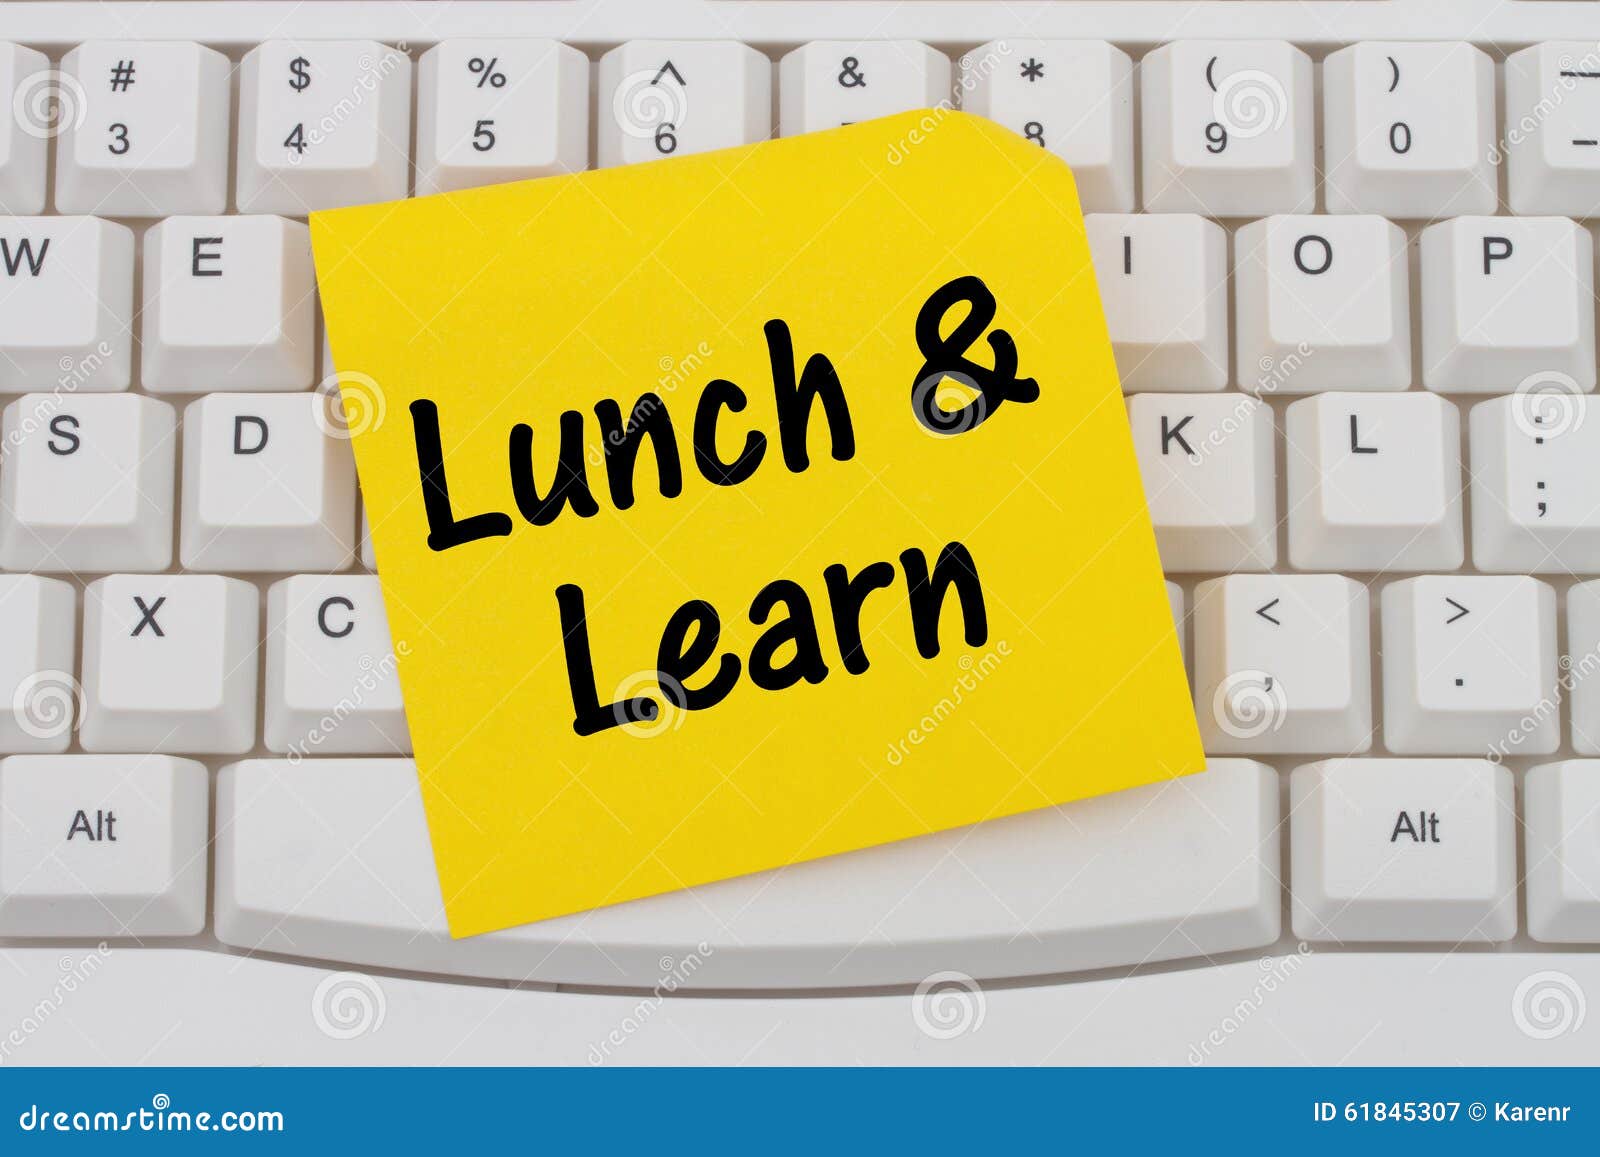 lunch and learn, computer keyboard and sticky note